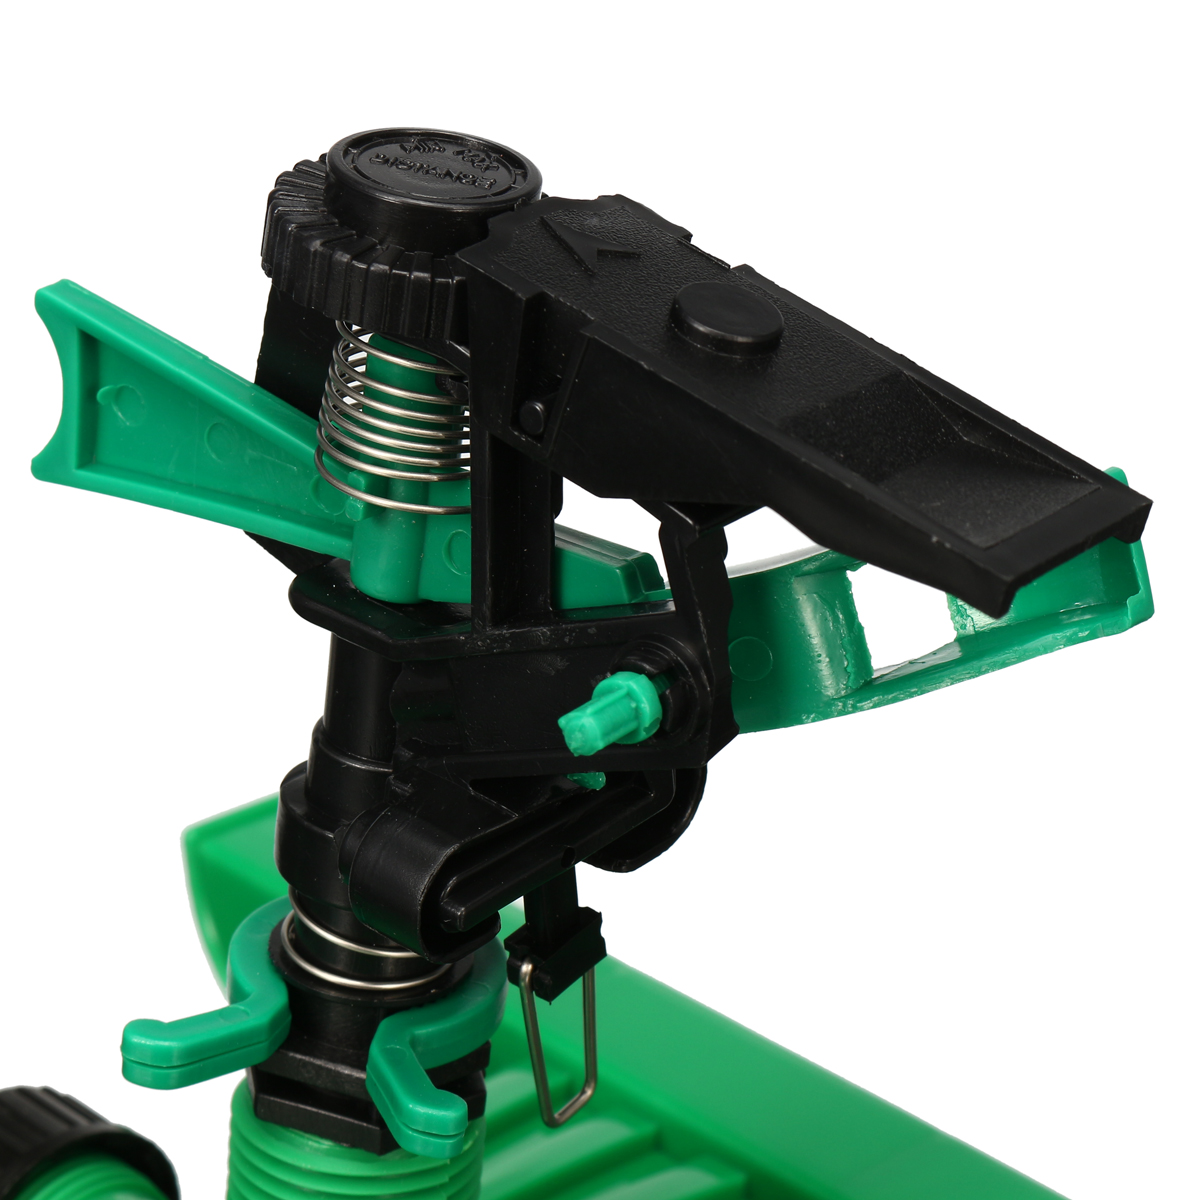 H-Base-Plastic-Auto-Rotating-Lawn-Sprinkler-Garden-Lawn-Plant-Grass-Watering-Tool-1558817-9